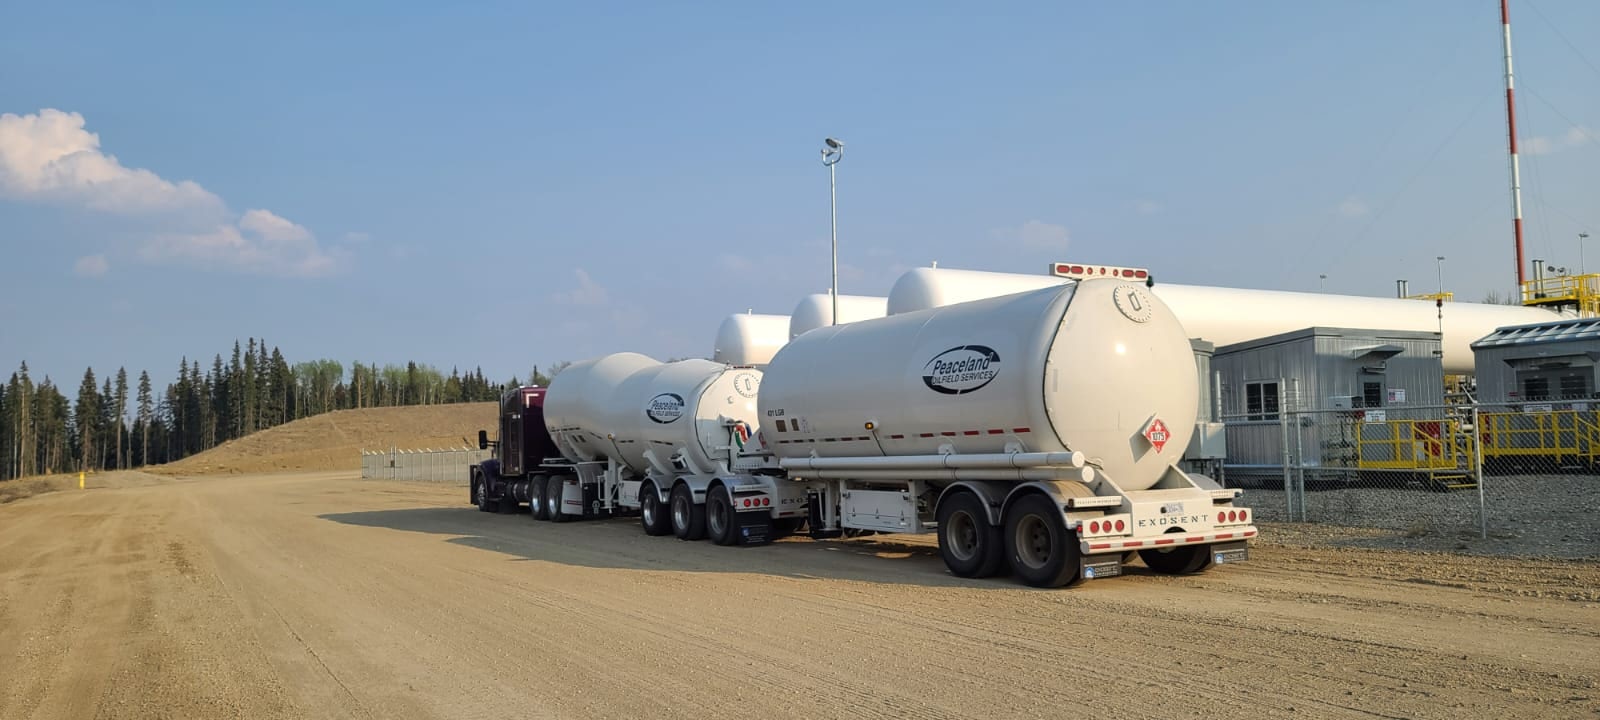 Peaceland truck hauling NGLs from oil and gas facility